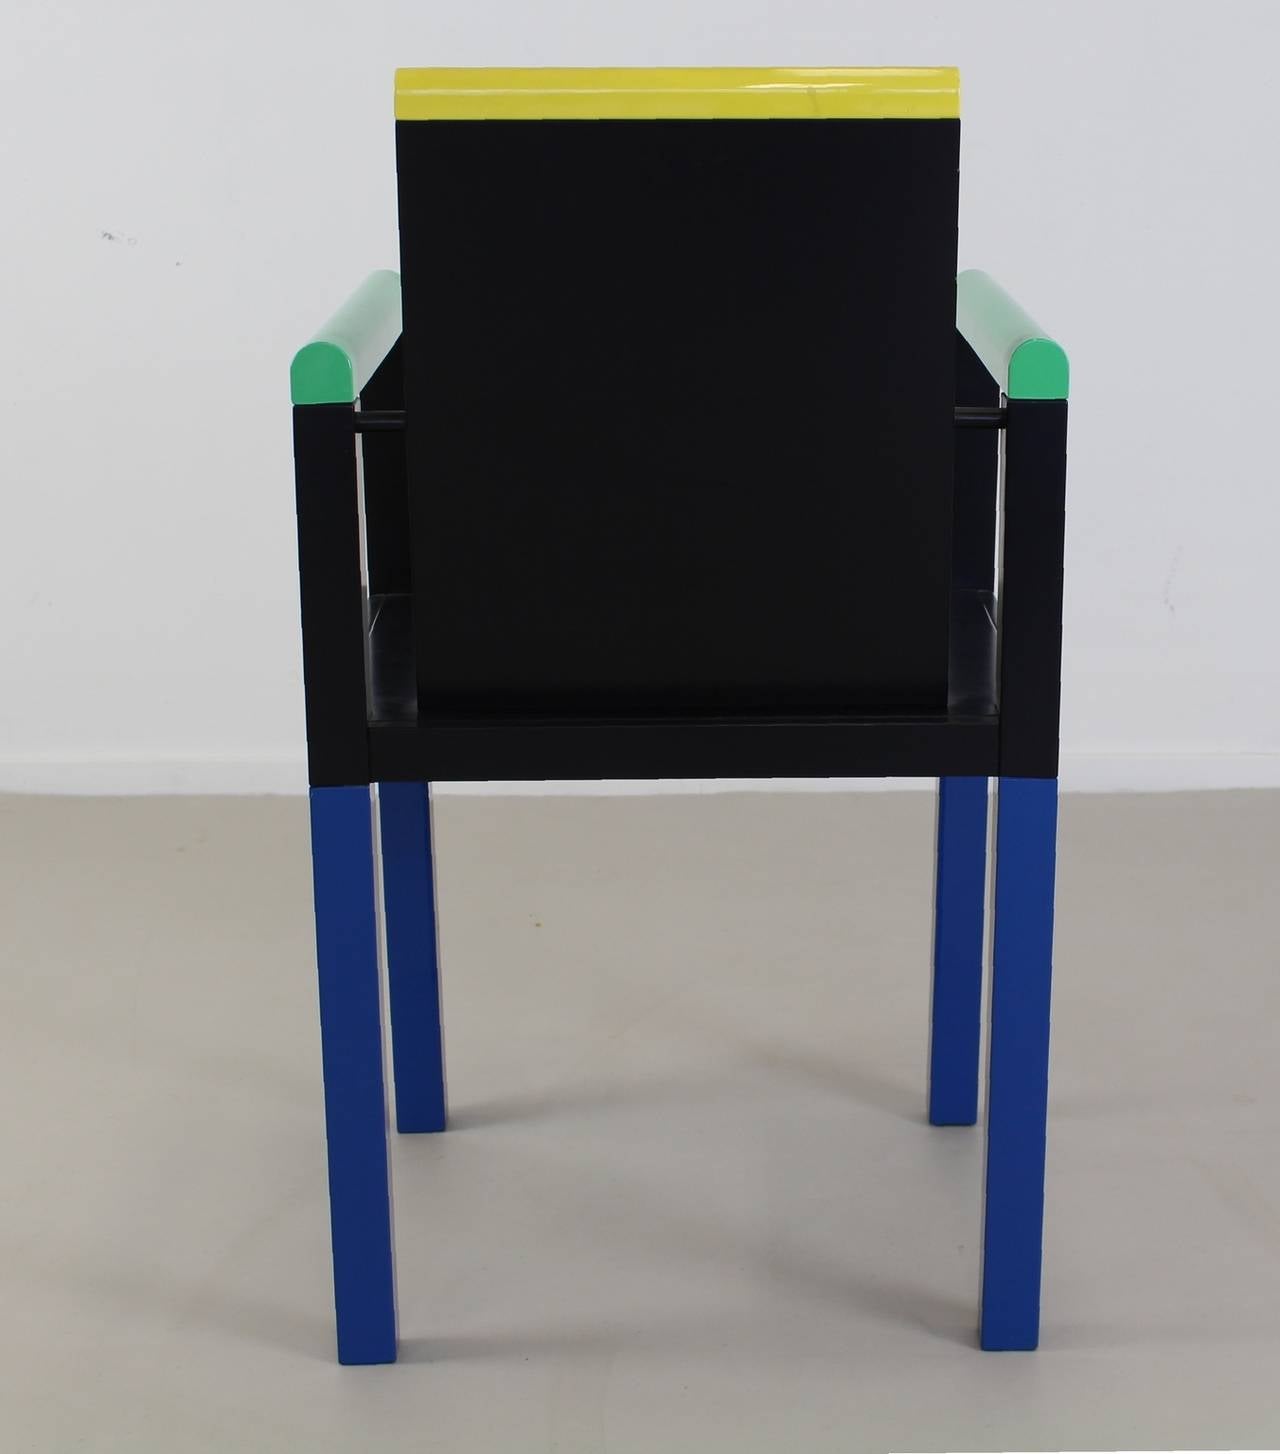 Co-founder of the Memphis Group together with Sottsass.
George Sowden designed this colorful chair.
Manufacturer: Memphis, Italy.
Model palace chair.